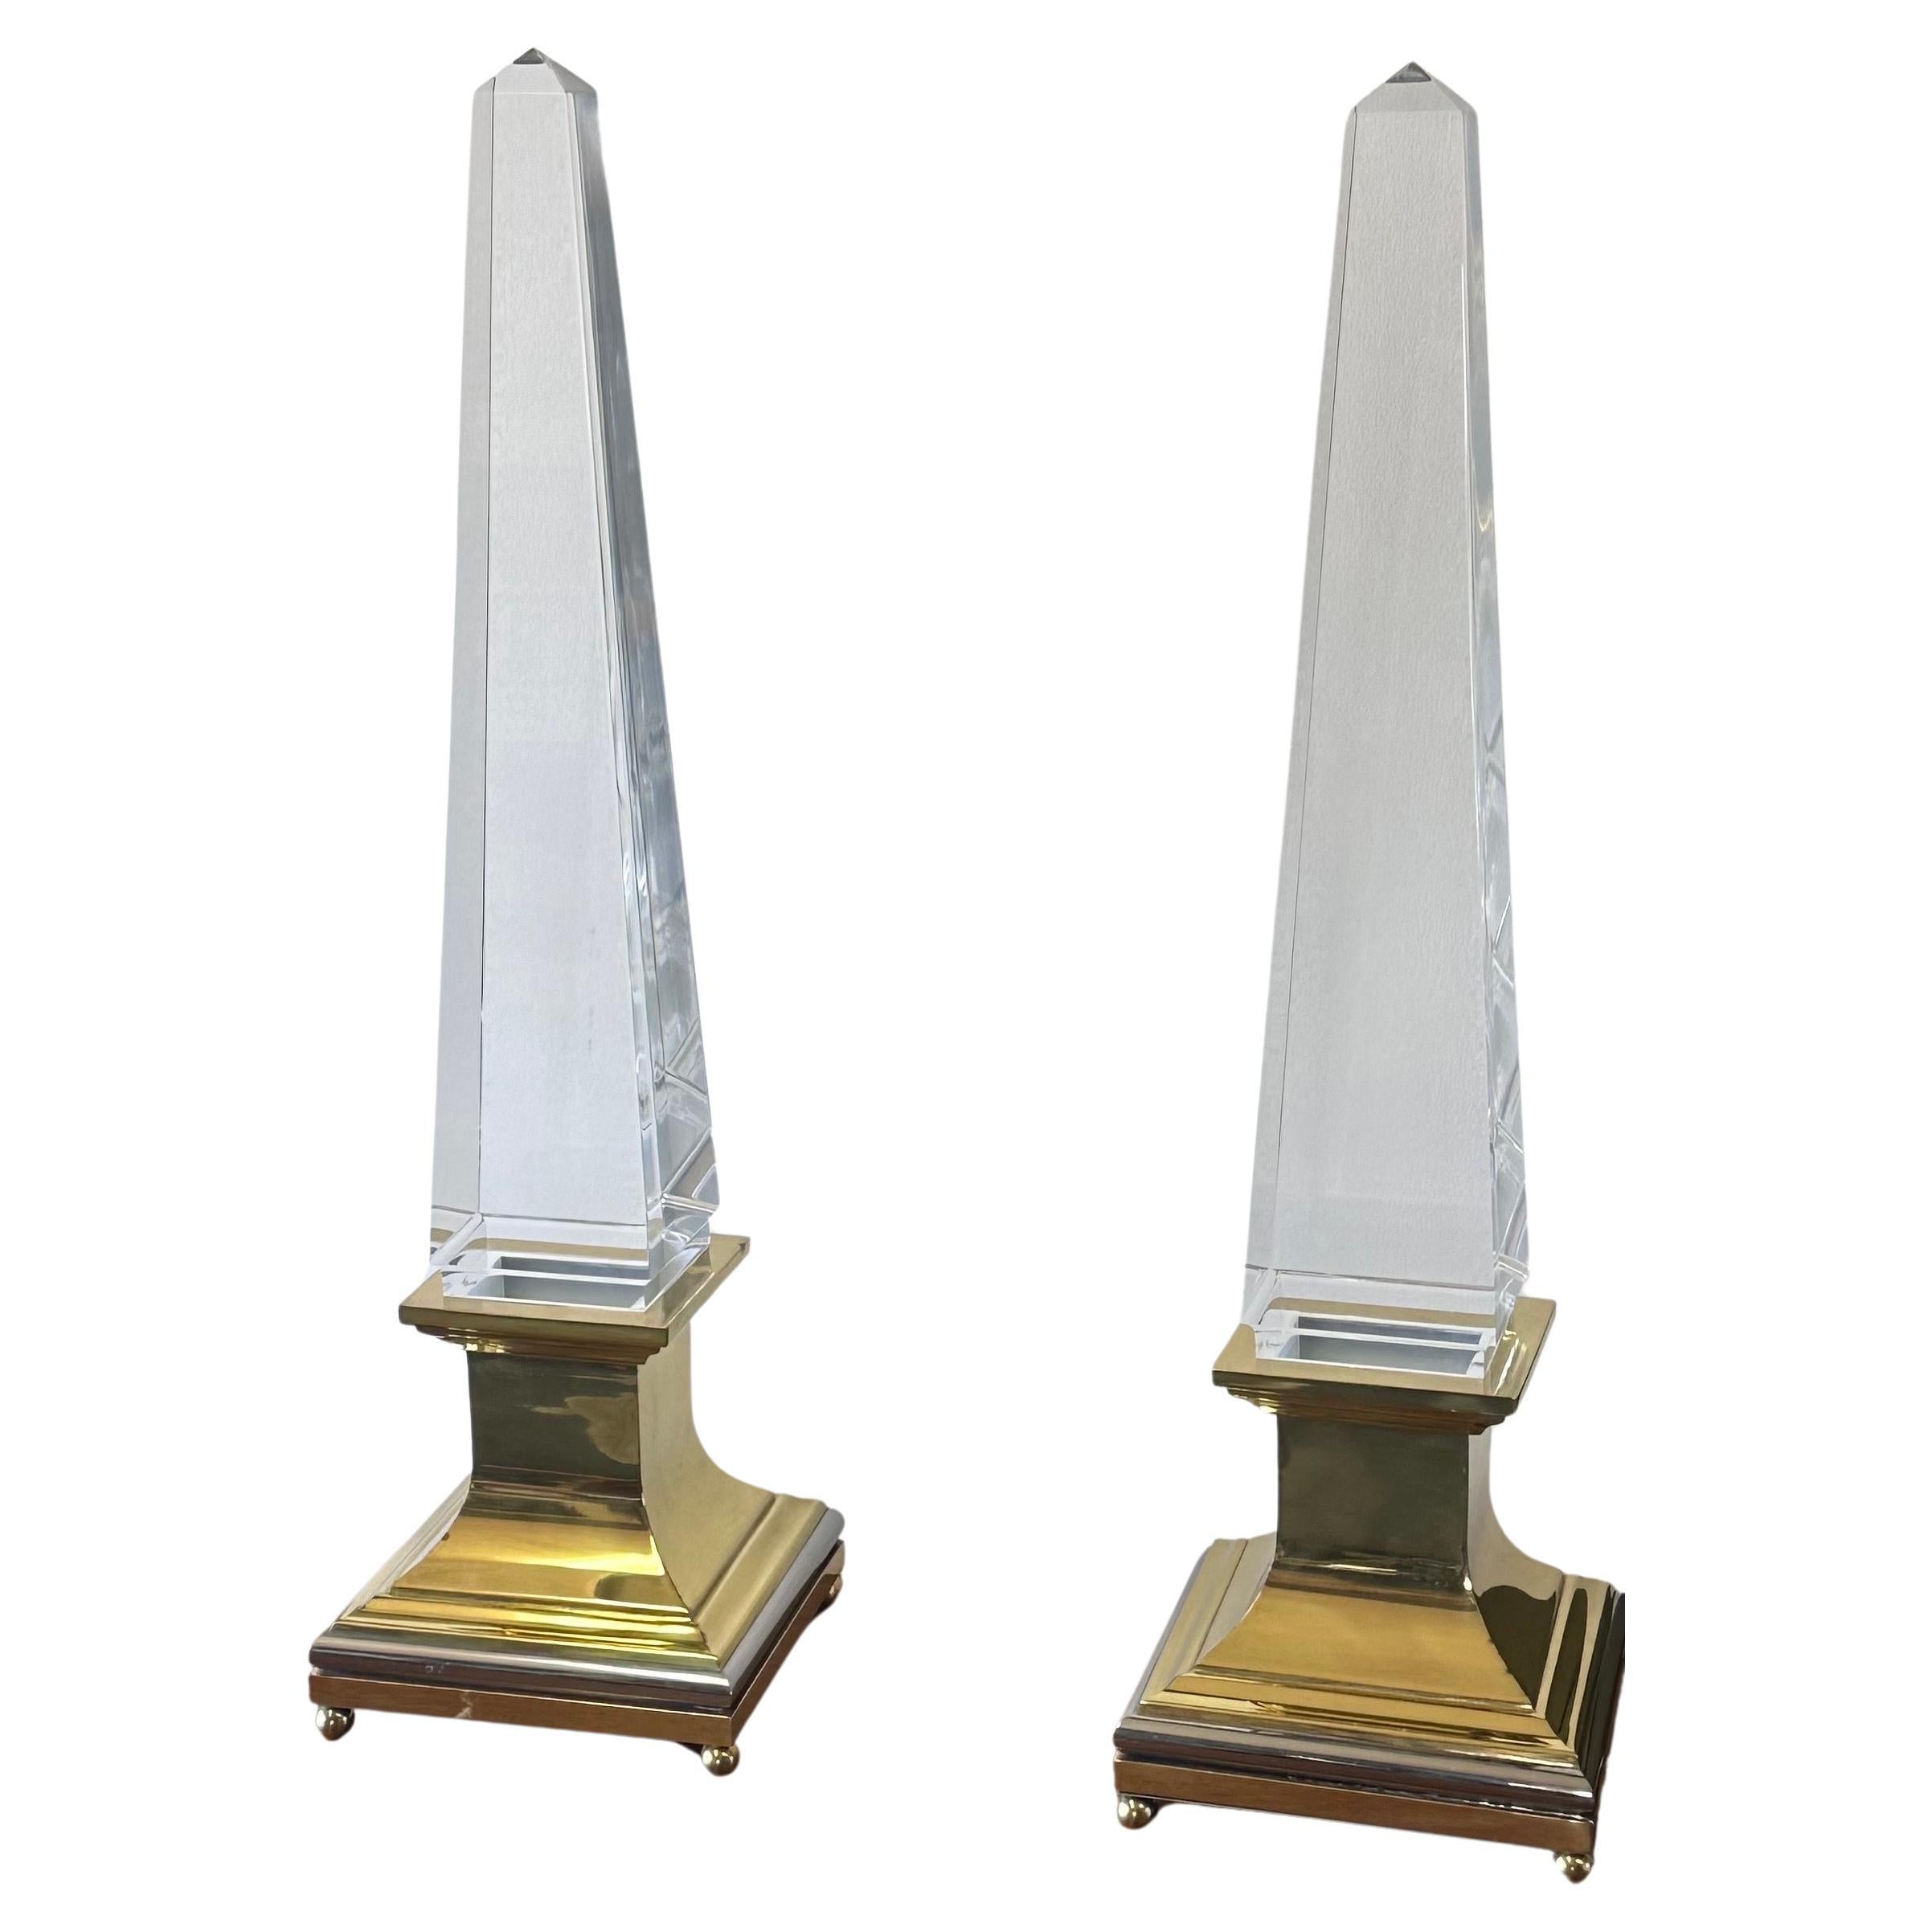 Pair of Lucite and Brass Obelisk Table Lamps by Sandro Petti for Maison Jansen For Sale